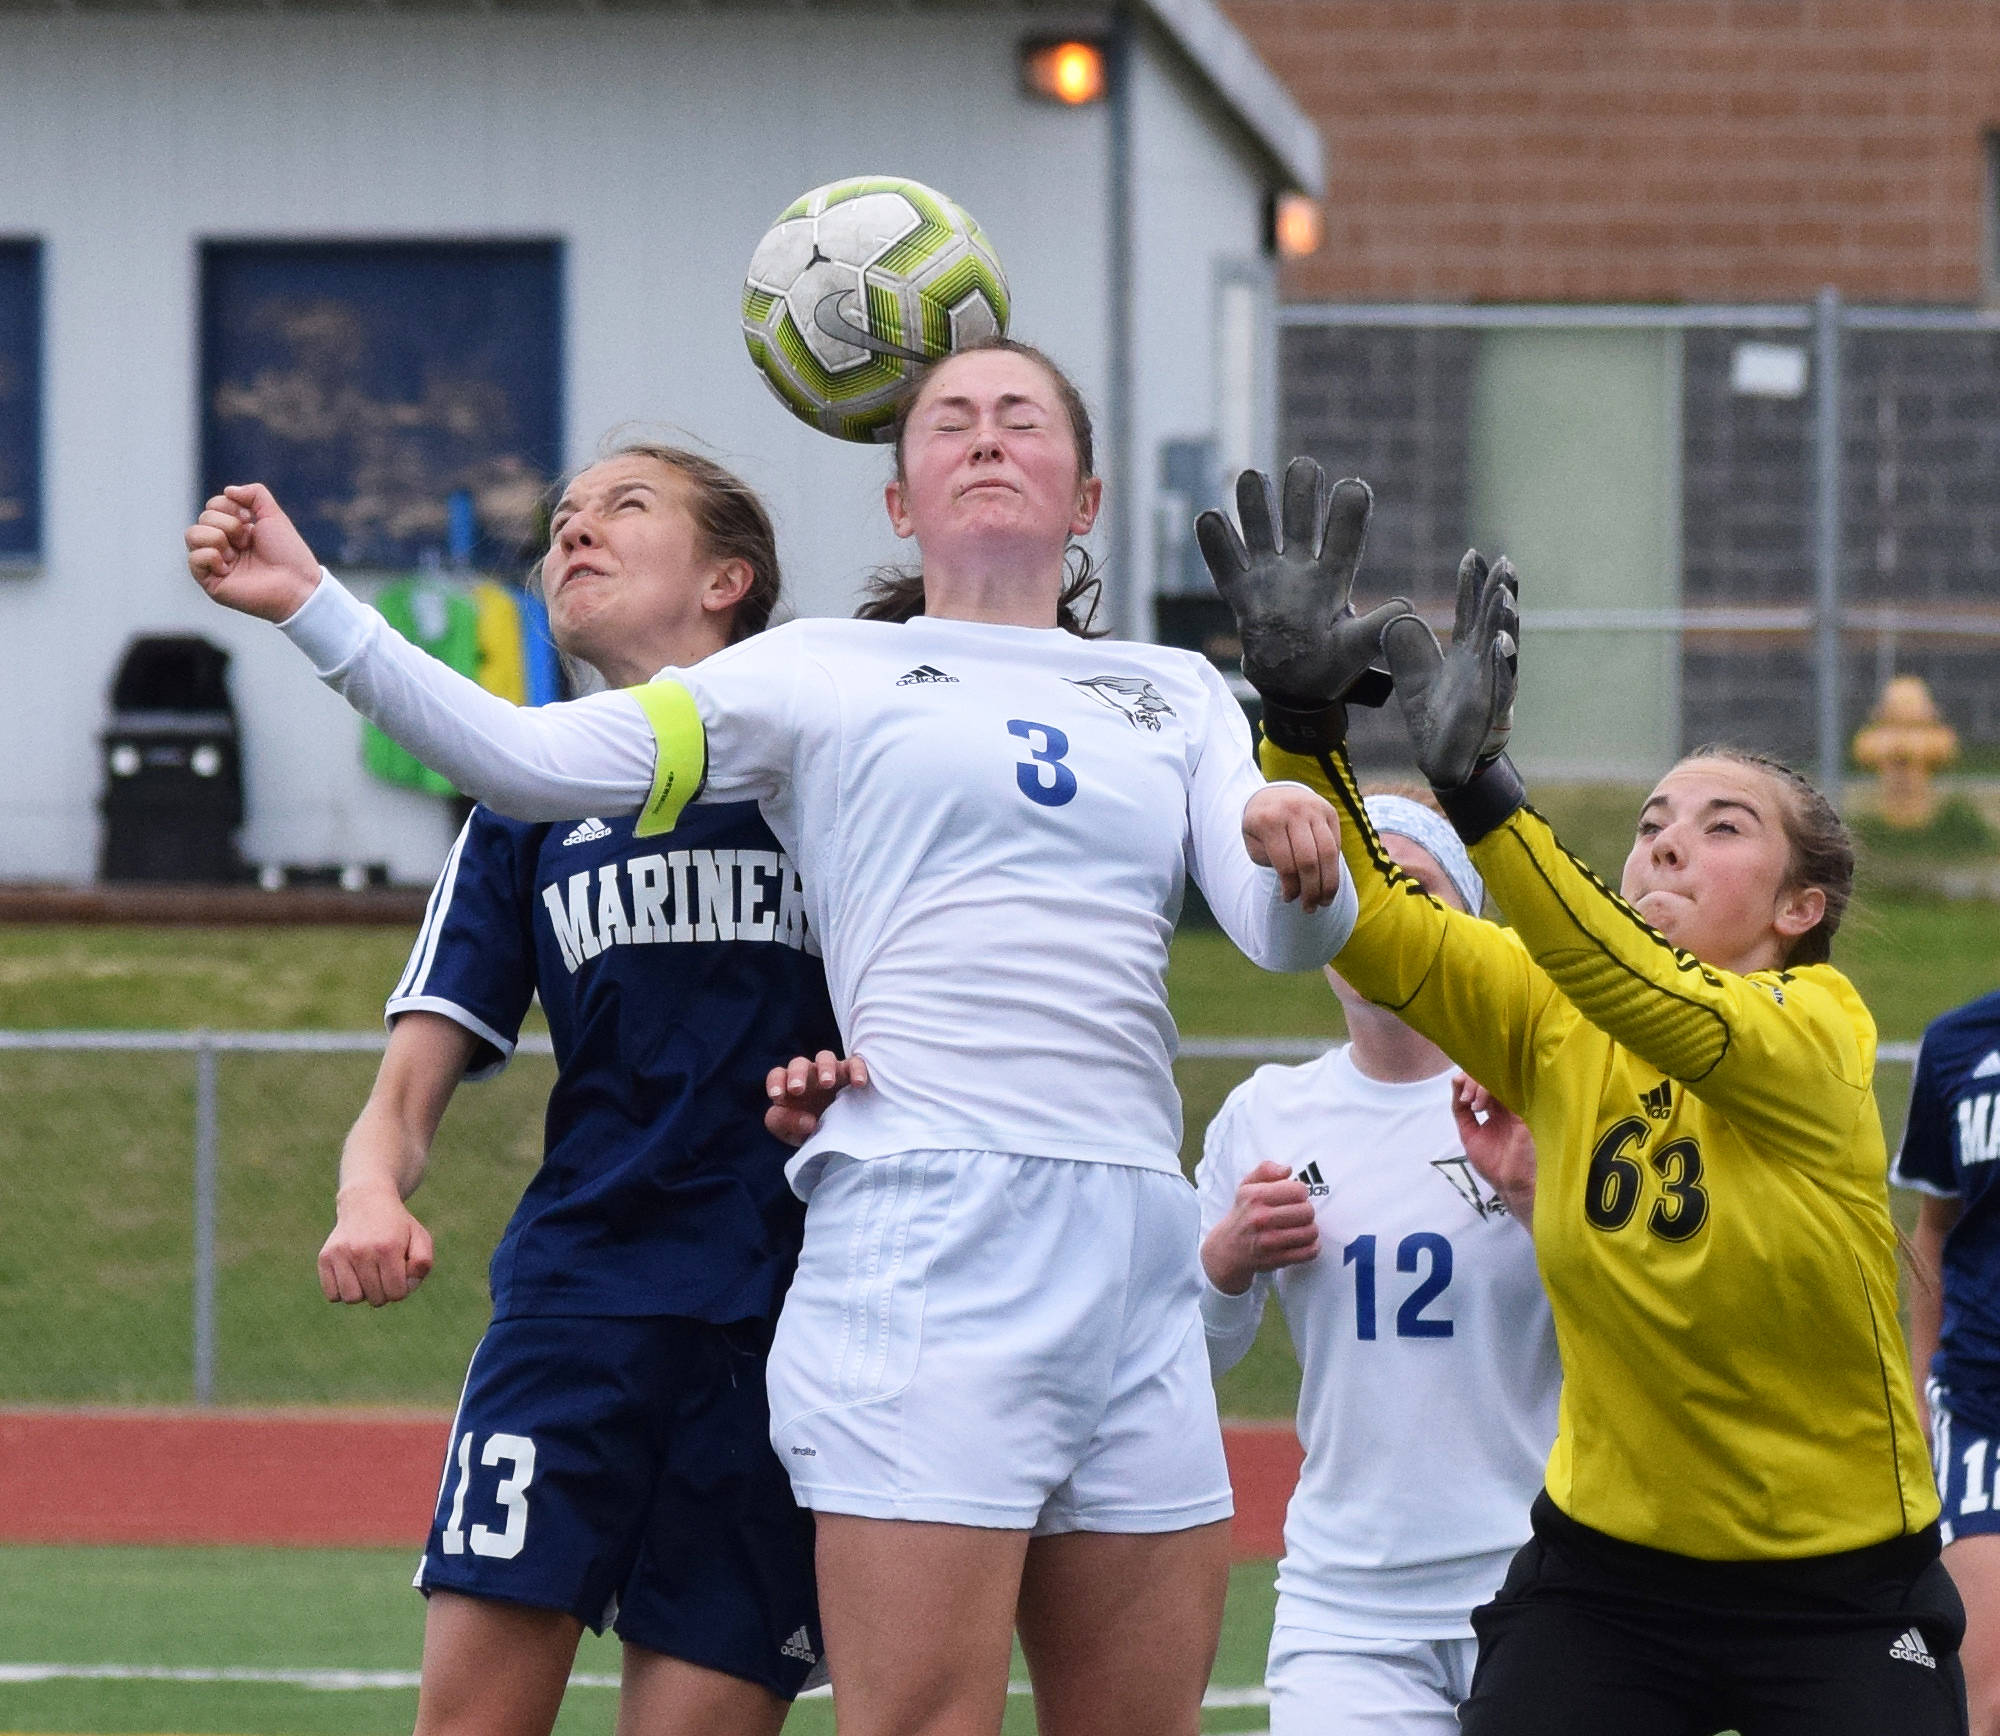 Homer’s Kappa Reutov (left) jumps for a header against Thunder Mountain’s Macey Fuette and Thunder Mountain goalkeeper Sam Dilley, Thursday, May 23, 2019, at the Div. II state soccer championships in Eagle River. (Photo by Joey Klecka/Peninsula Clarion)